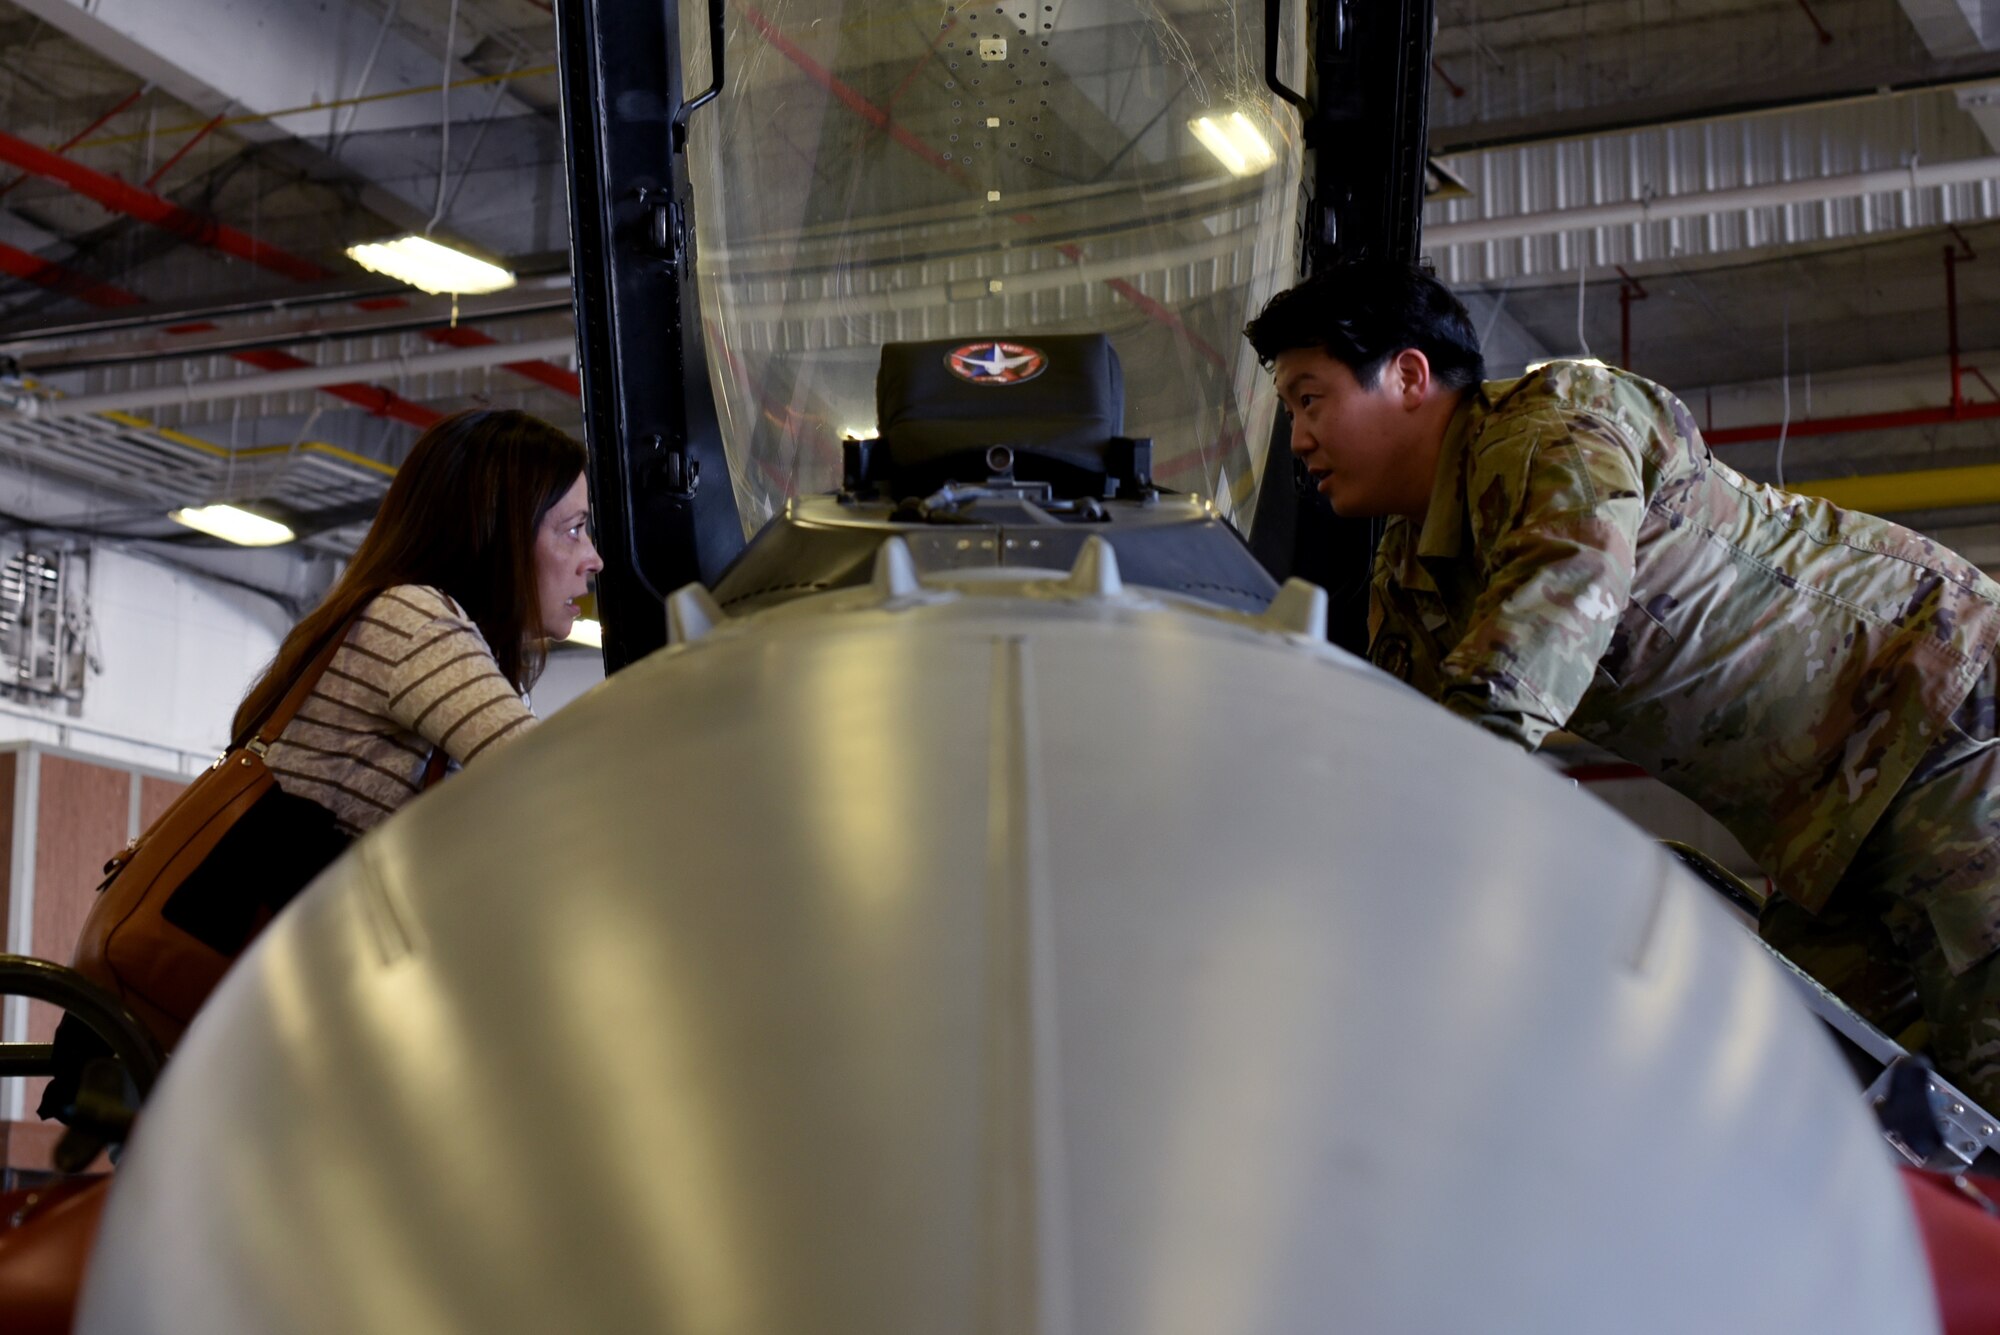 Cheryl Duckworth, Key Volunteers Program leader explores a F-16 Fighting Falcon with Staff Sgt. Andrew Kim, 301st Fighter Wing Maintenance Squadron egress technician at Naval Air Station Joint Reserve Base Fort Worth, Texas on May 1st , 2022. The F-16 Fighting Falcon is a compact, multi-role fighter aircraft. It is highly maneuverable and has proven itself in air-to-air combat and air-to-surface attack. (U.S. Air Force photo by Staff Sgt. Randall Moose)